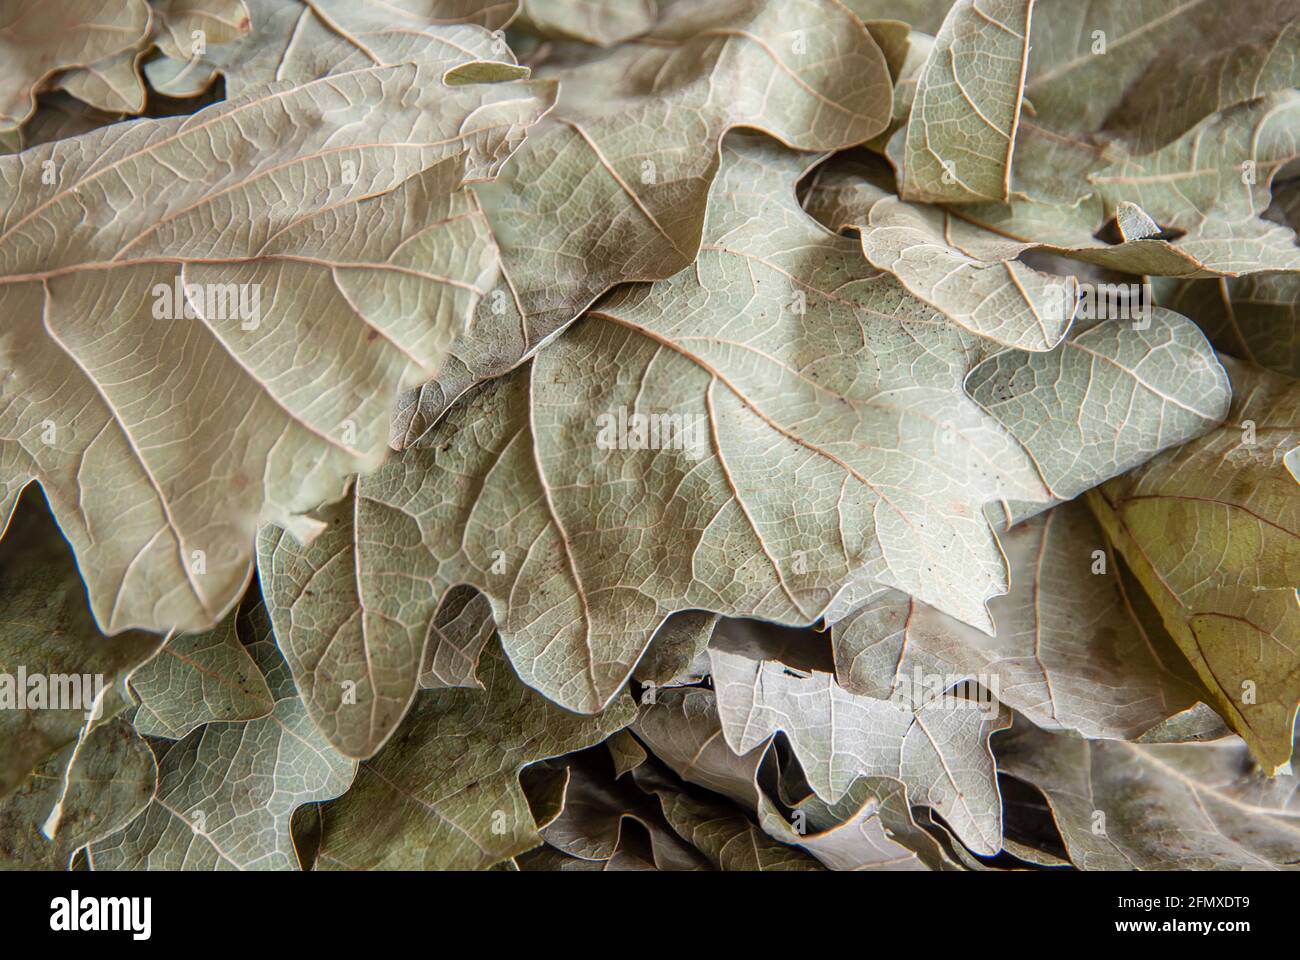 Dry oak leaves from a bath broom close-up. Background image Stock Photo